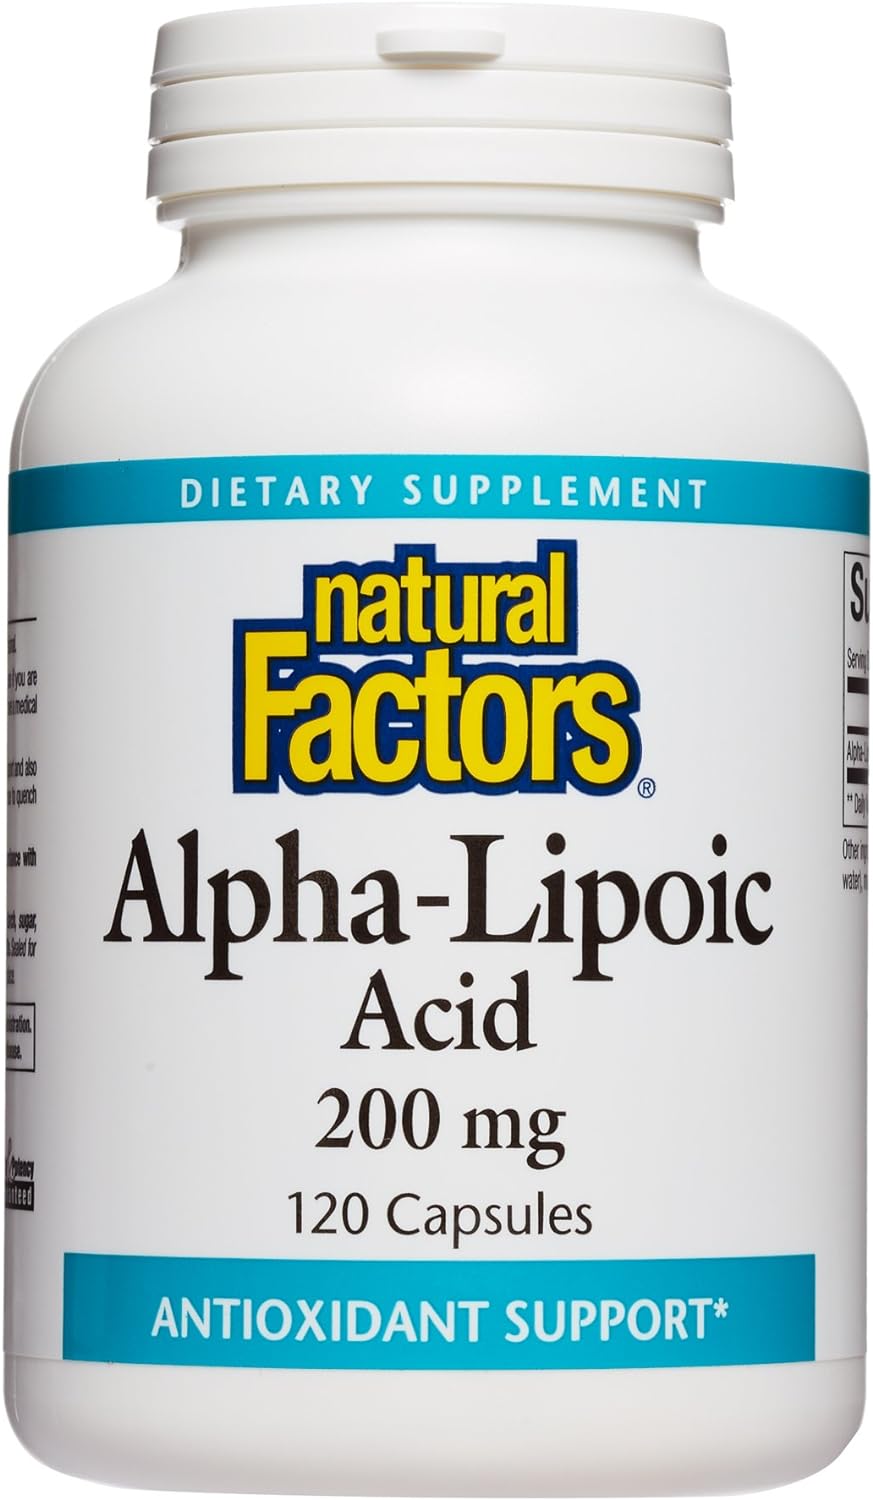 Natural Factors, Alpha-Lipoic Acid 200 mg, Antioxidant Support to Help Maintain Glucose Levels Already in a Normal Range, 120 Capsules (120 Servings)